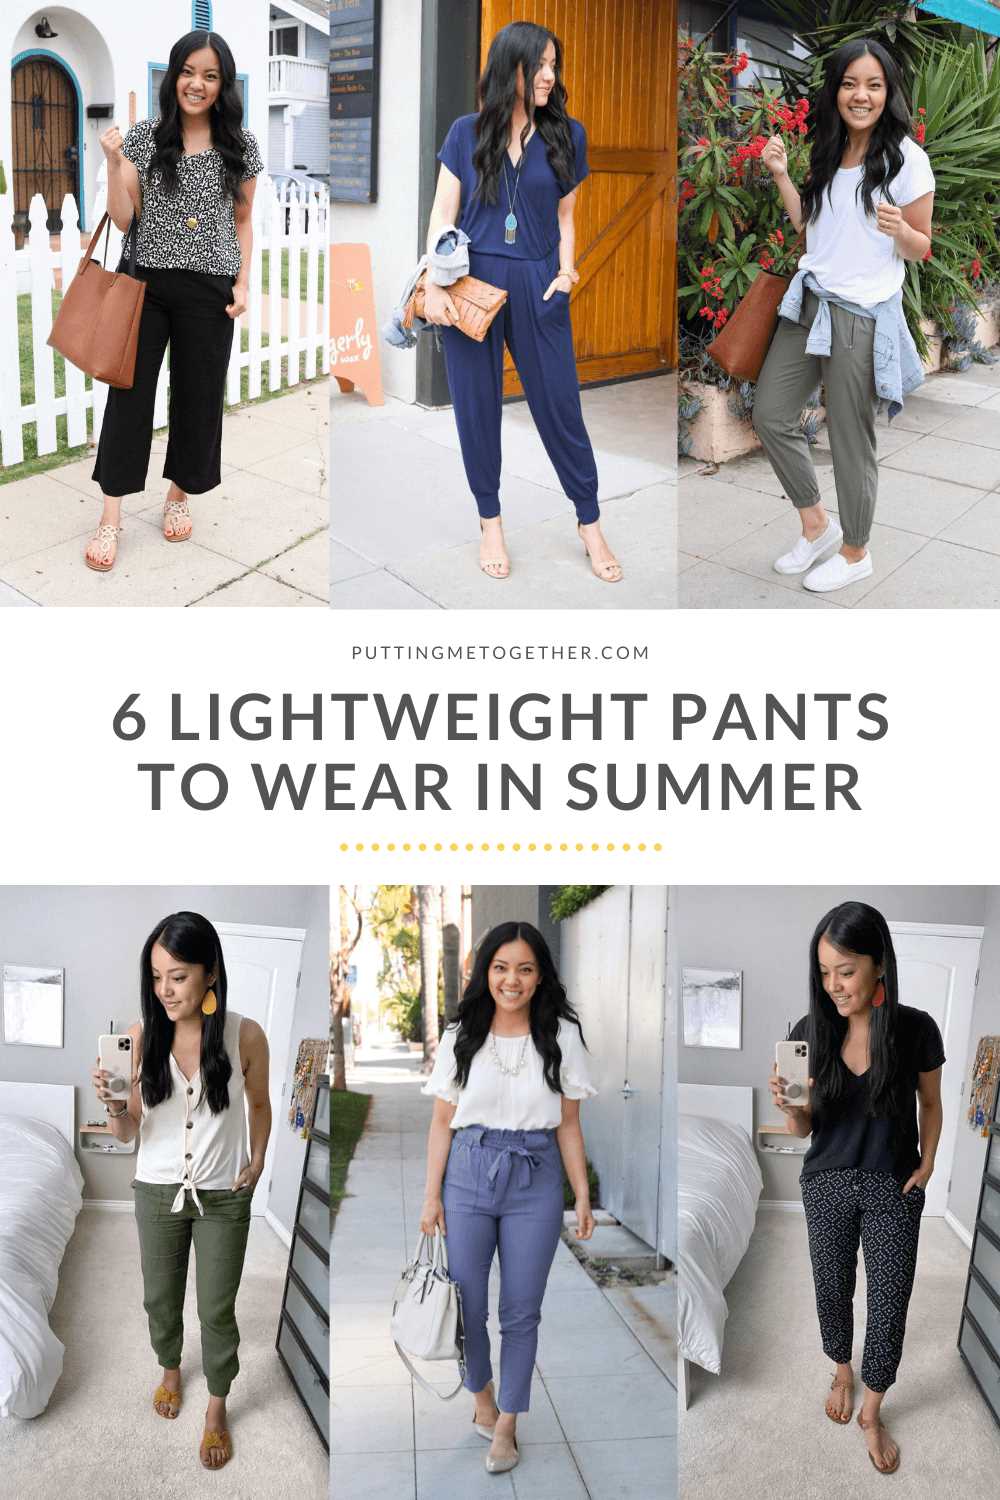 How to wear pants in the summer